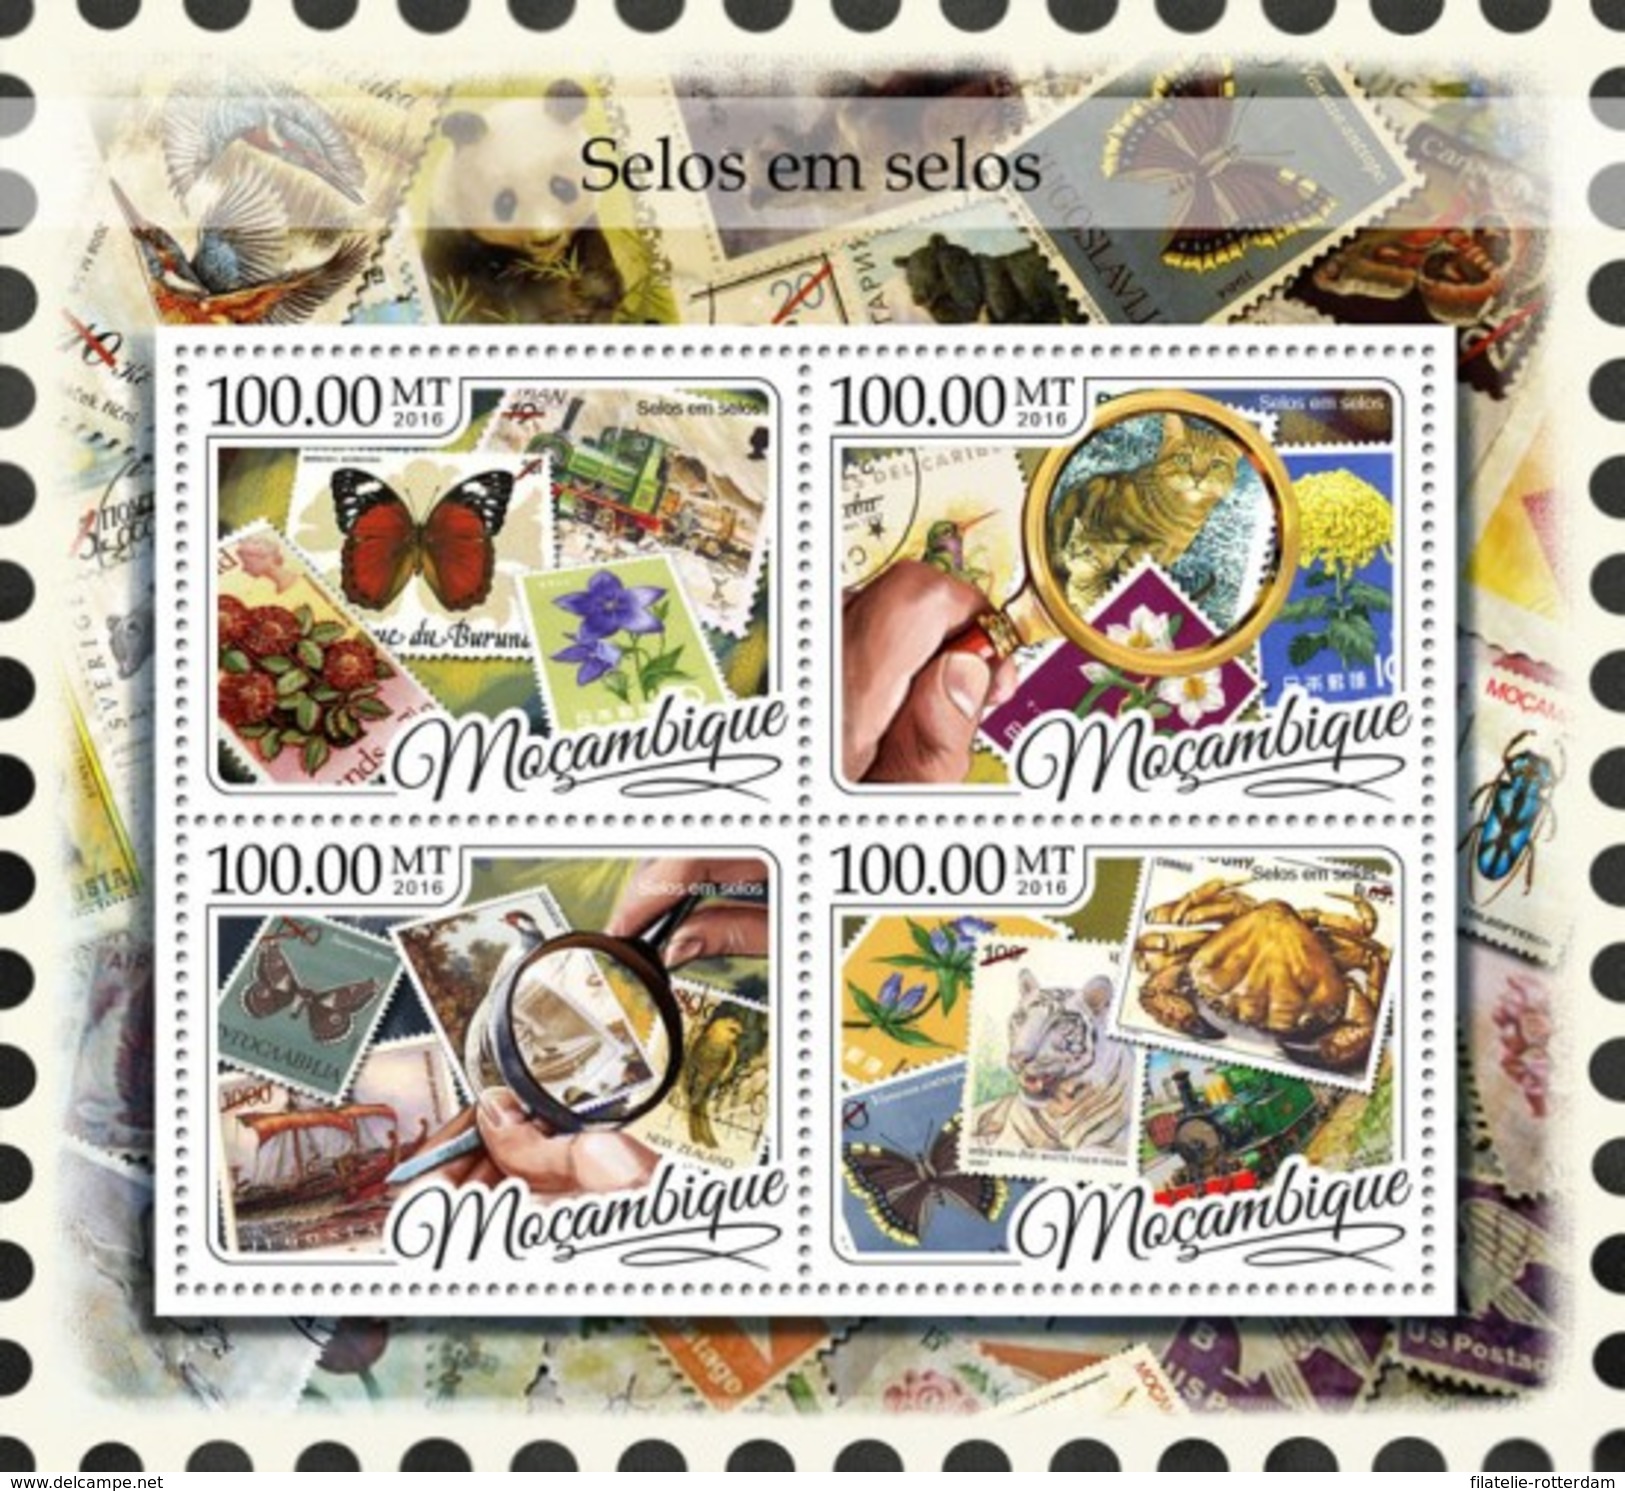 Mozambique - Postfris / MNH - Sheet Stamps On Stamps 2016 - Mozambico